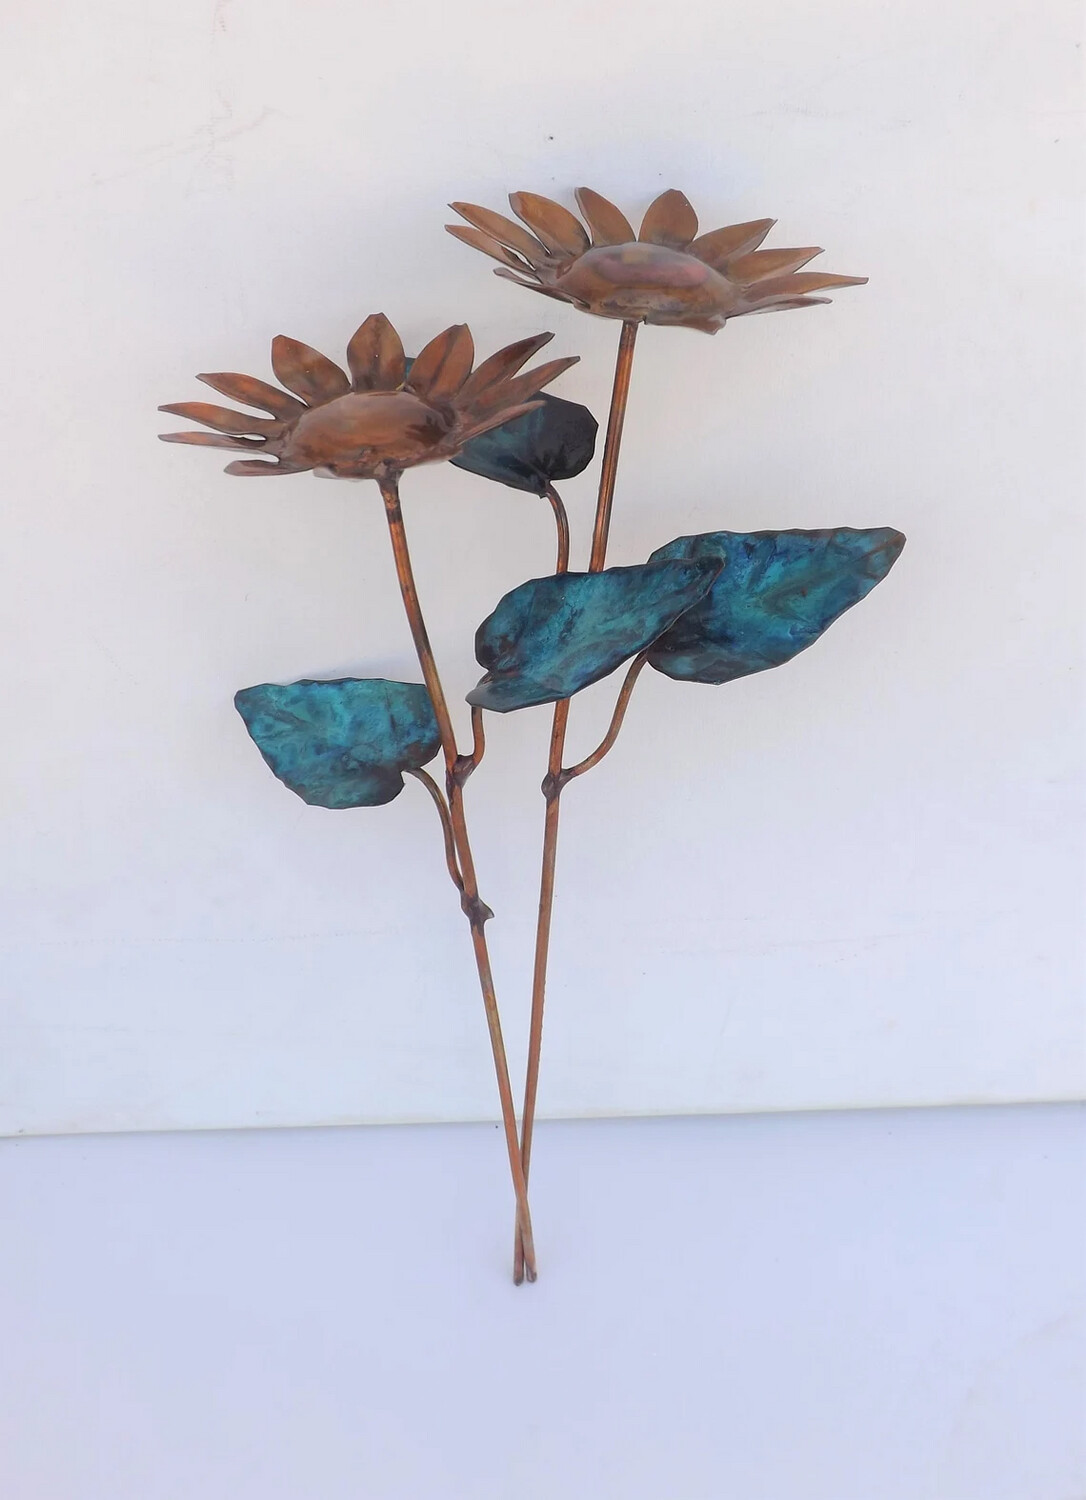 Copper Sunflower Set of Single Stem Decorative Flower Sculptures (available by order, please see details for shipping/inventory)